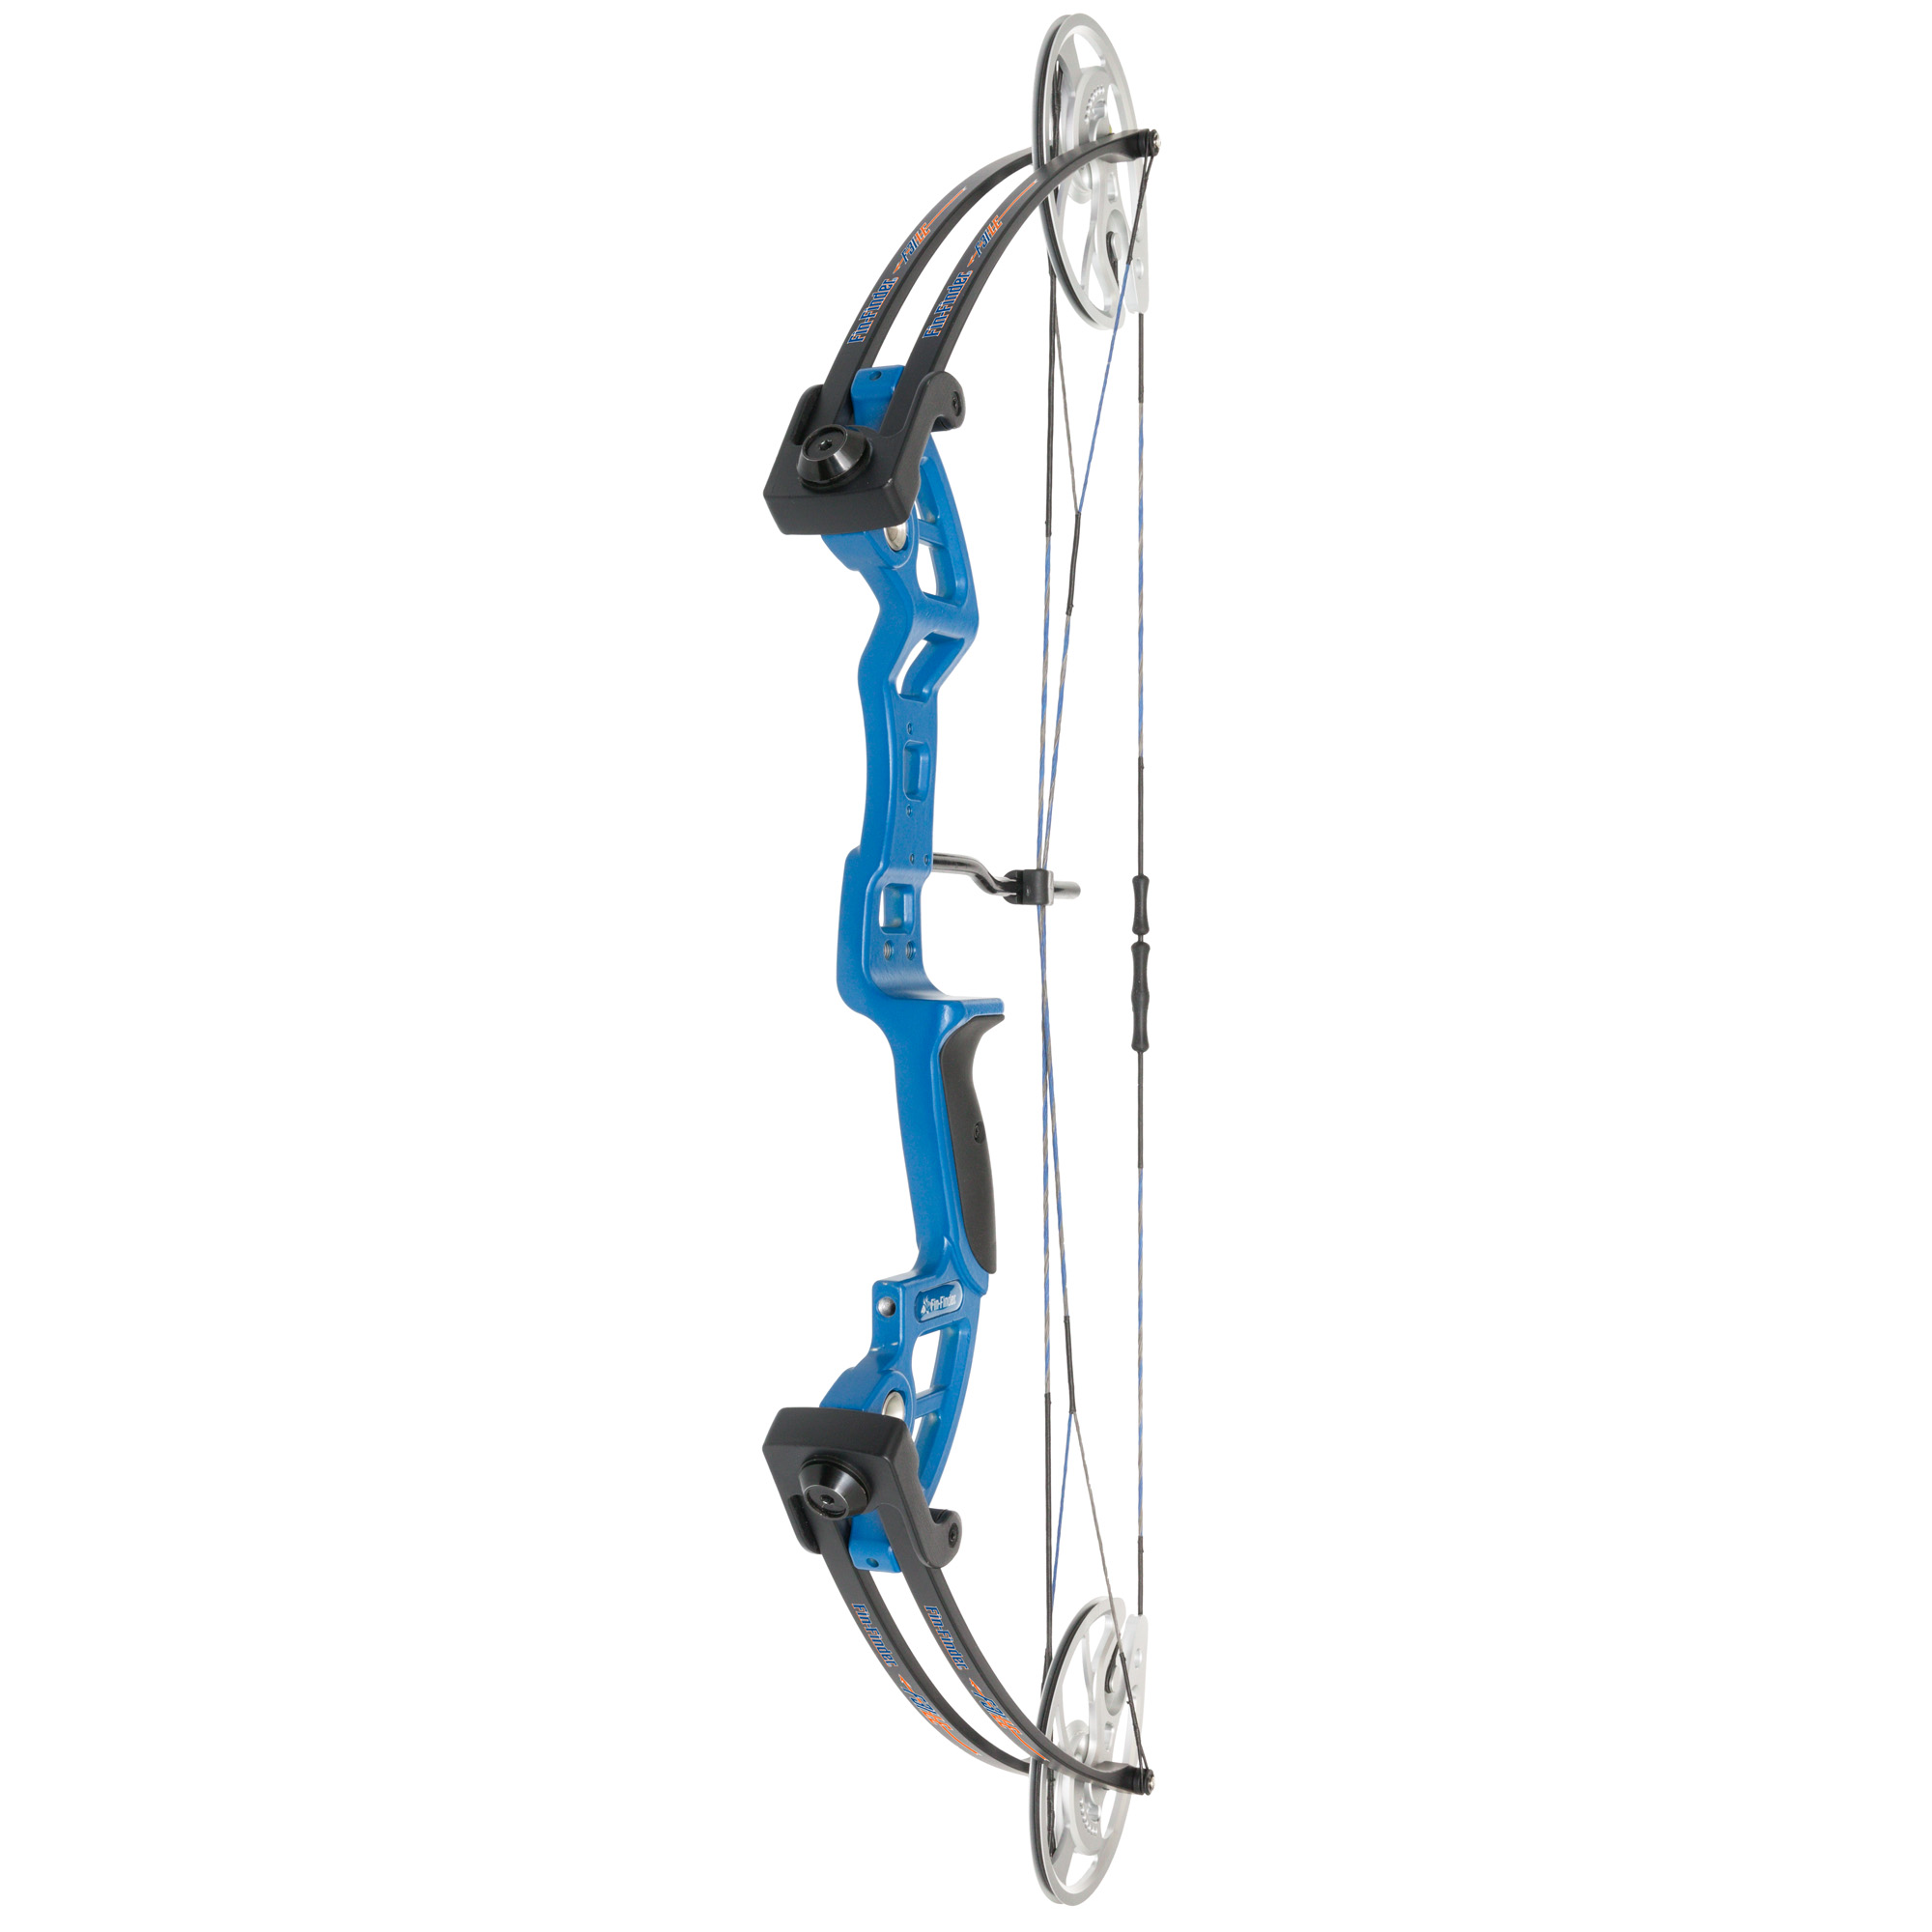 F-31 LE Compound Bow (Light Edition), Bowfishing